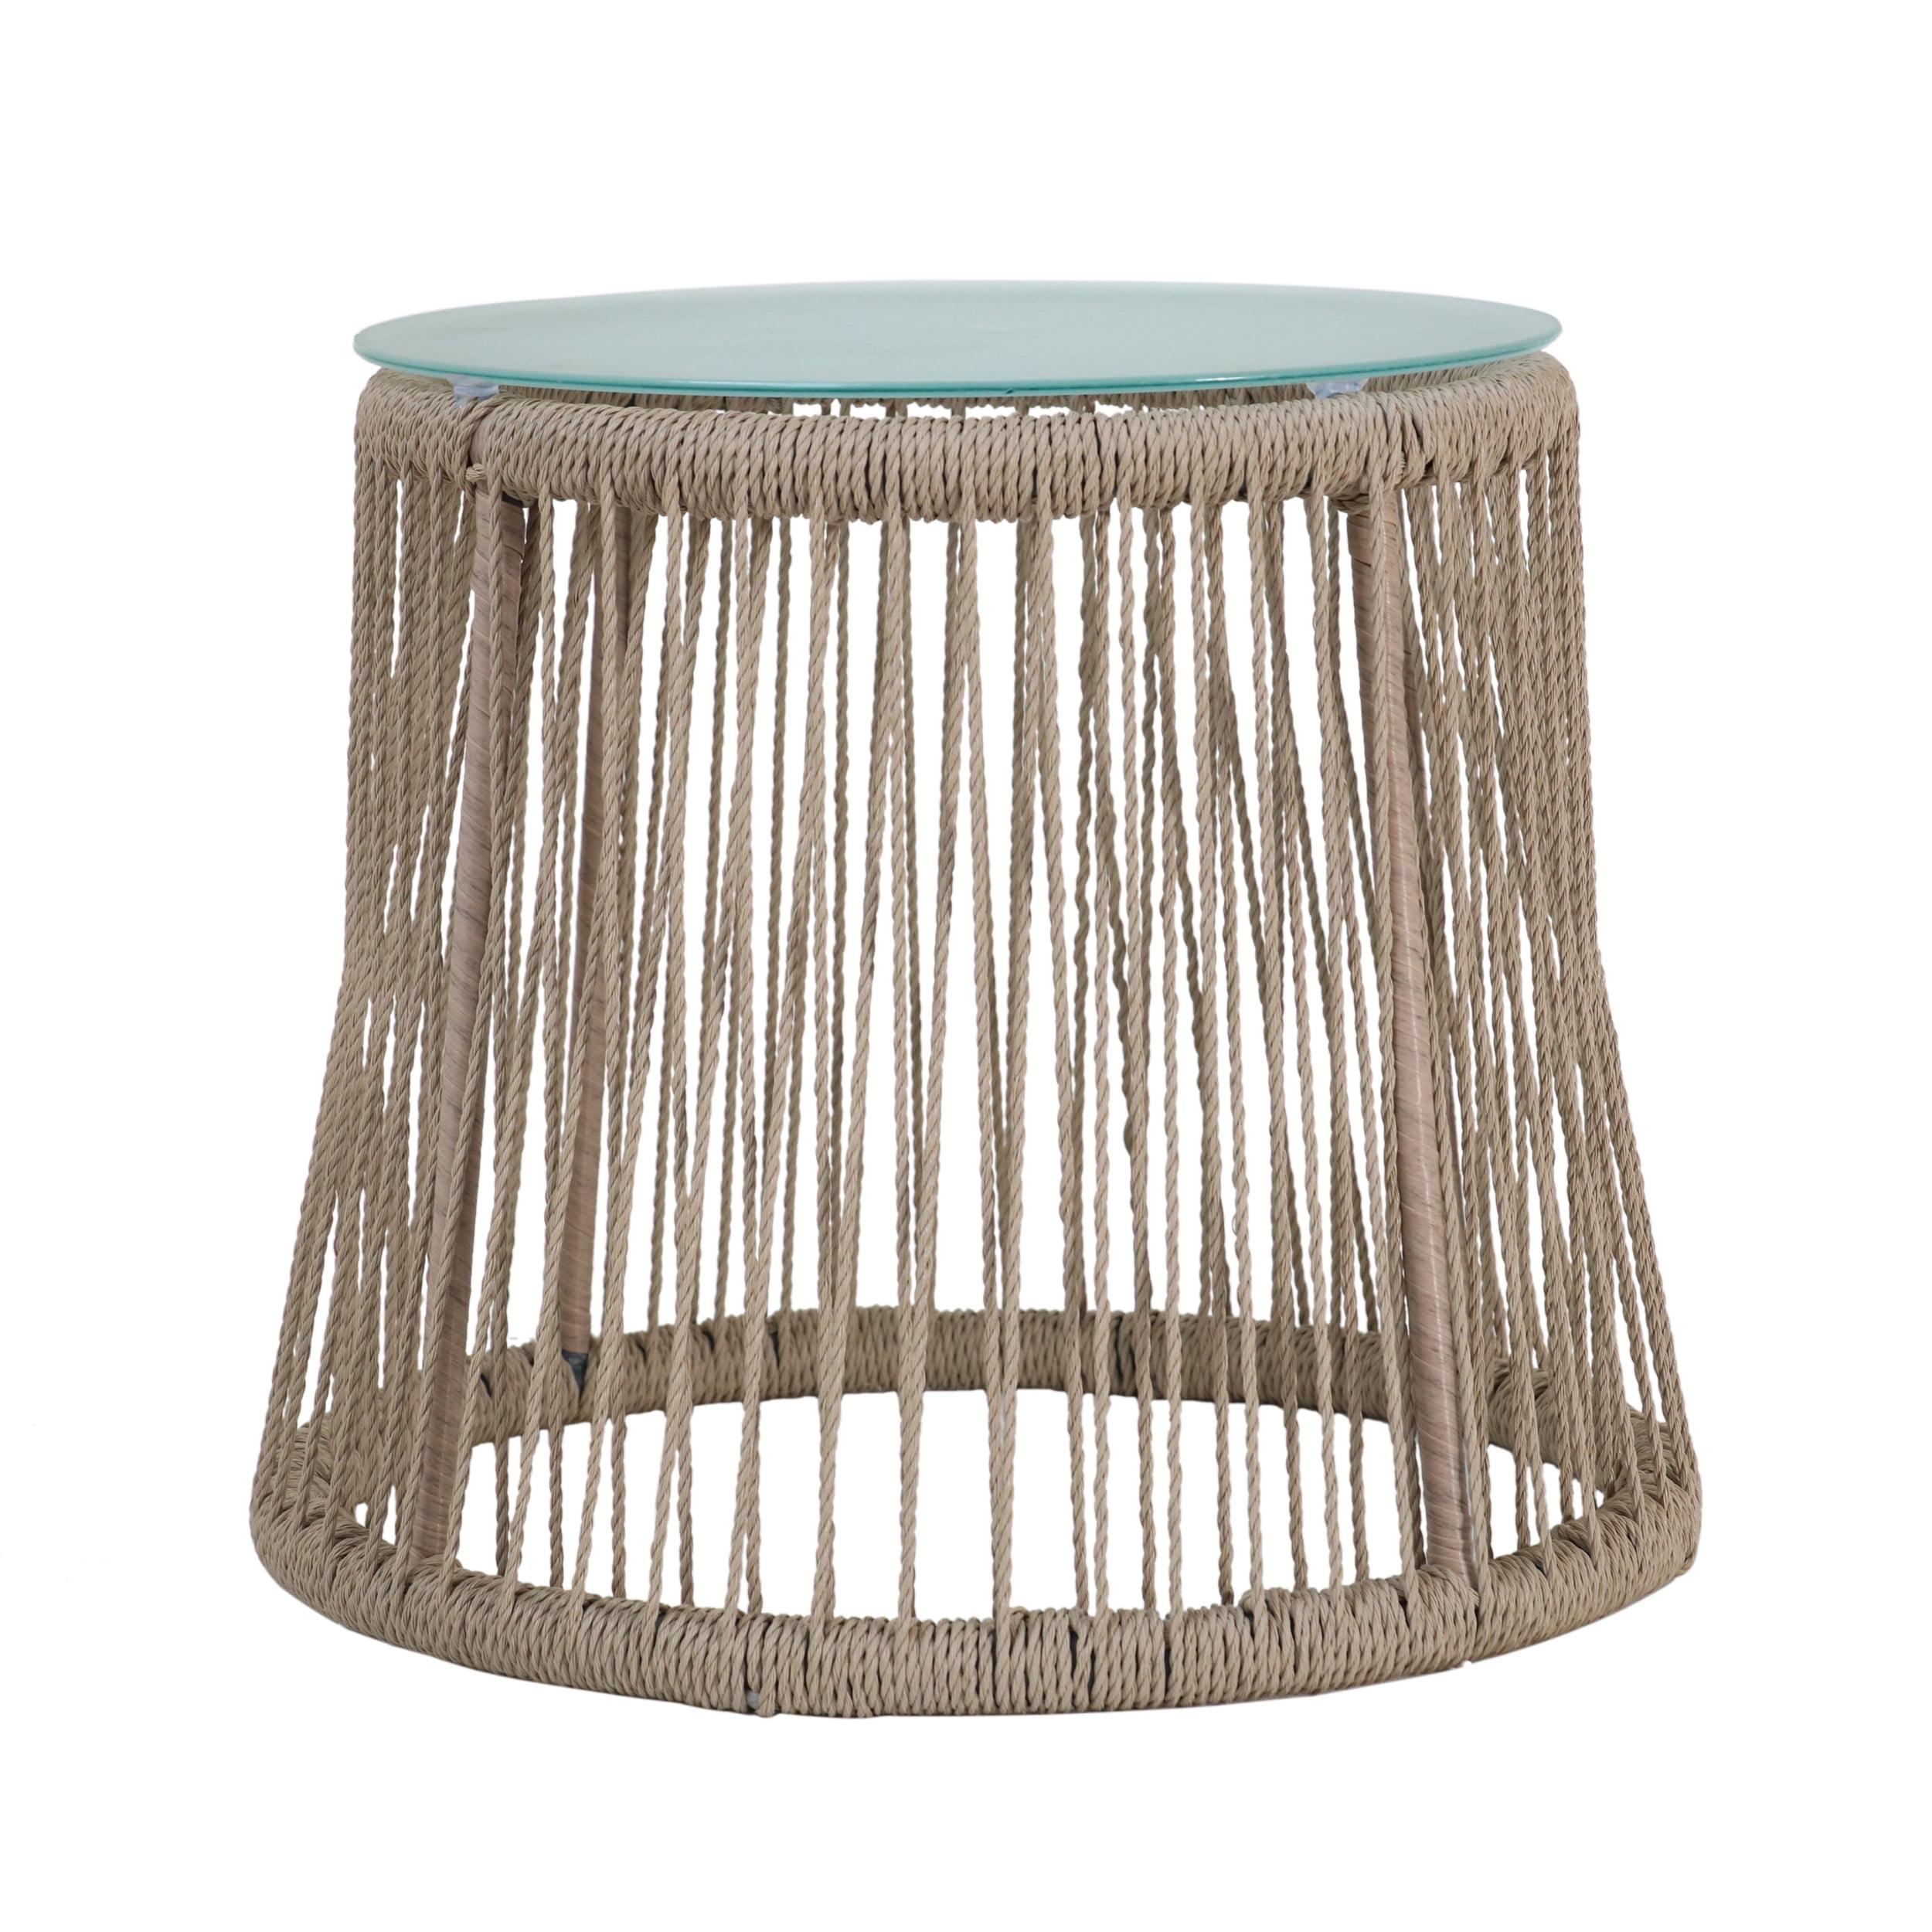 Bohemian Chic Round Side Table with Tempered Glass Top and Rope Detail